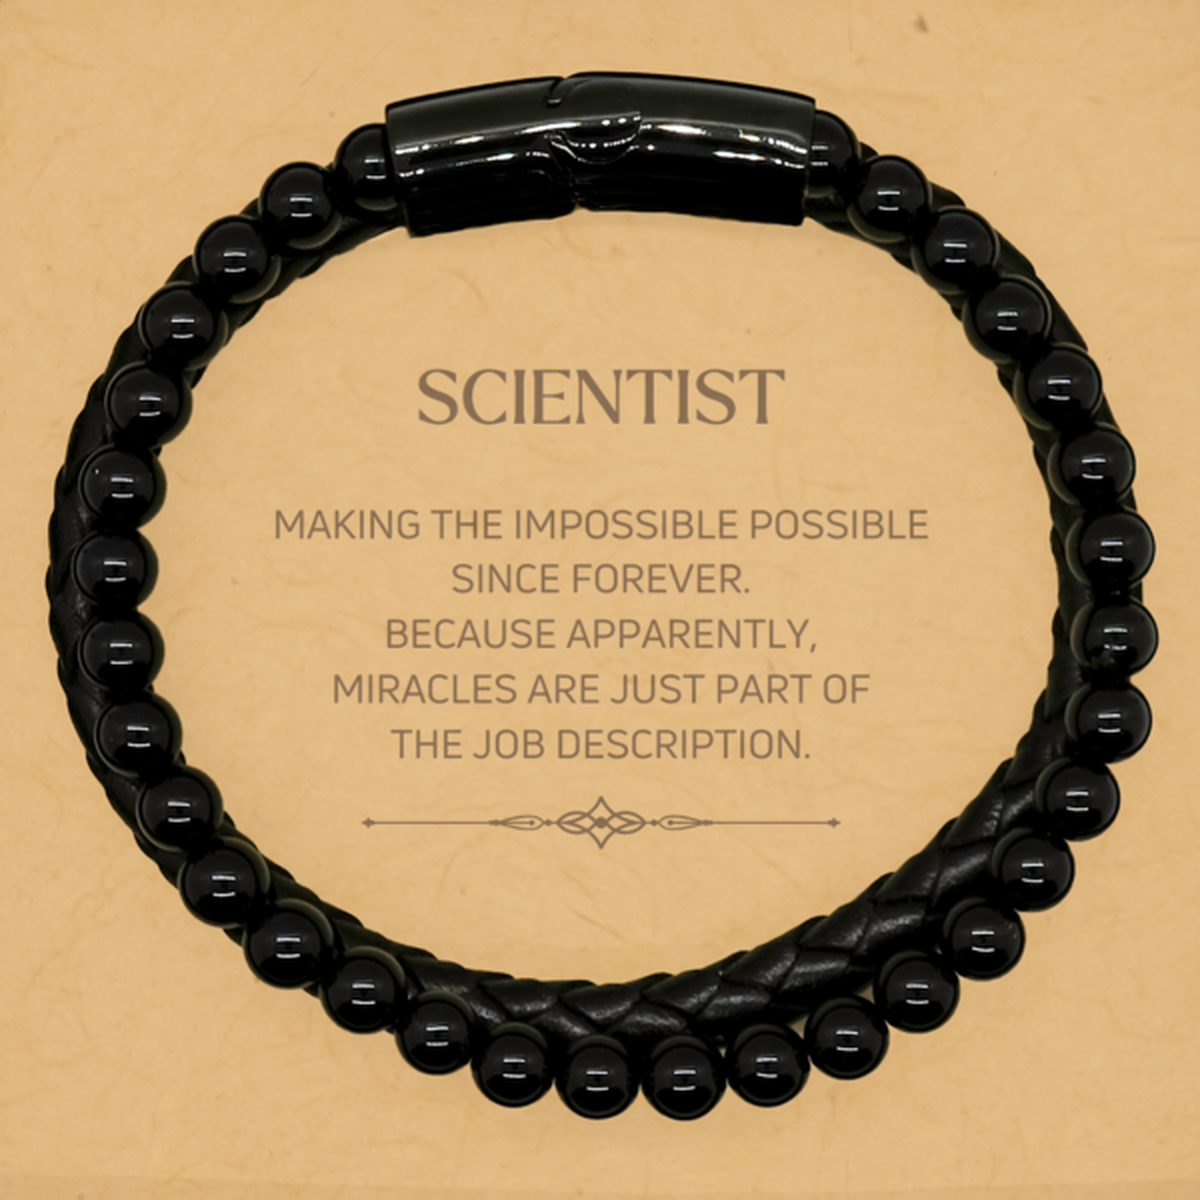 Funny Scientist Gifts, Miracles are just part of the job description, Inspirational Birthday Stone Leather Bracelets For Scientist, Men, Women, Coworkers, Friends, Boss